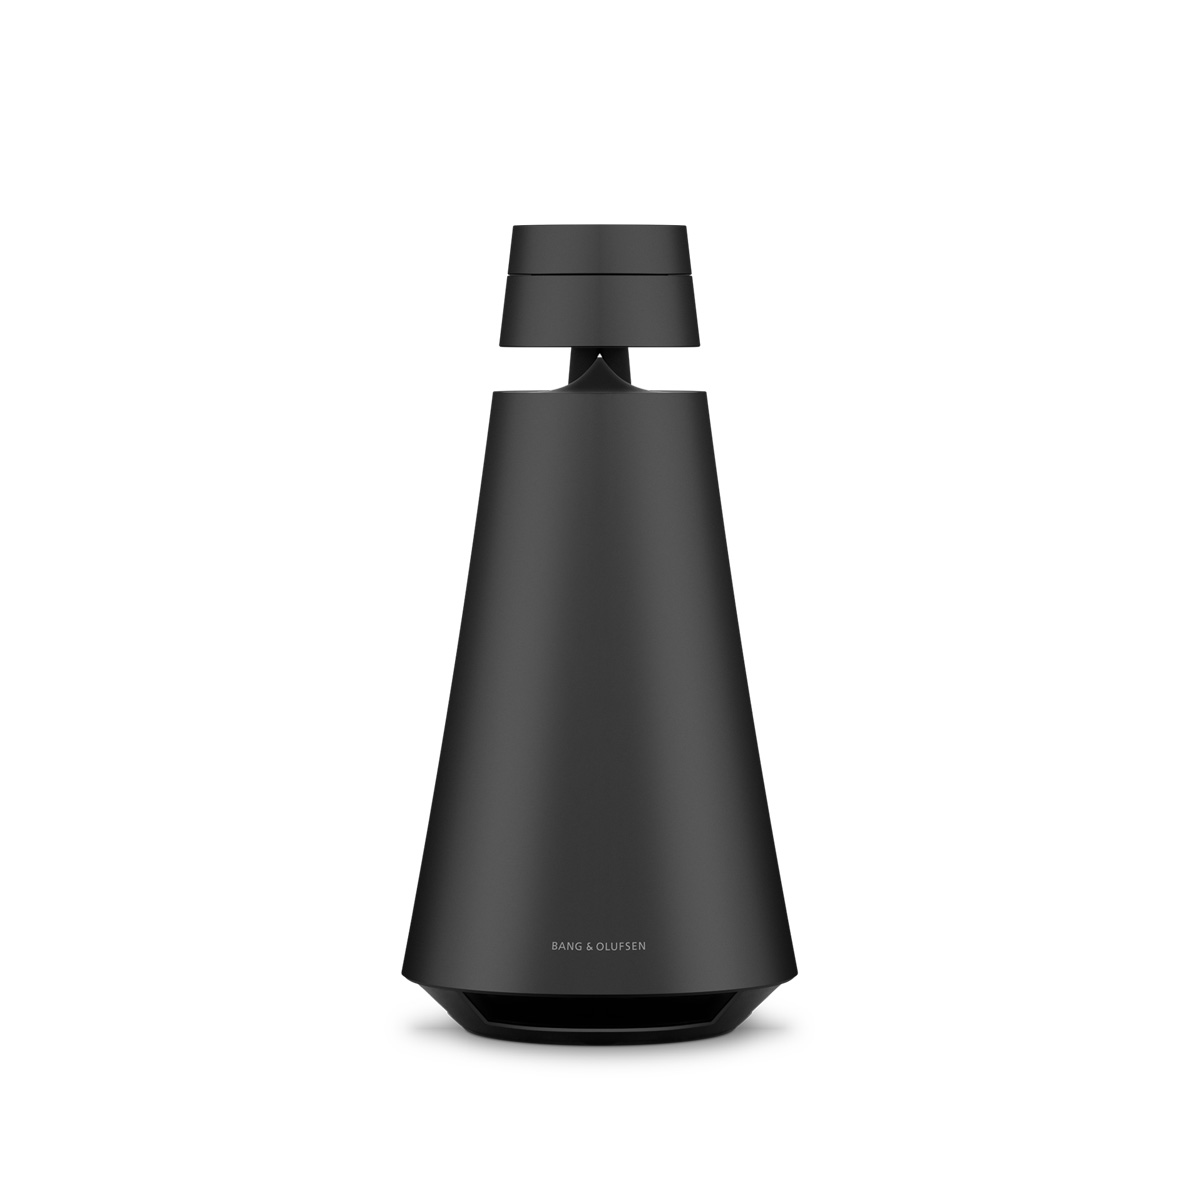 Beosound_1_anthracite_front